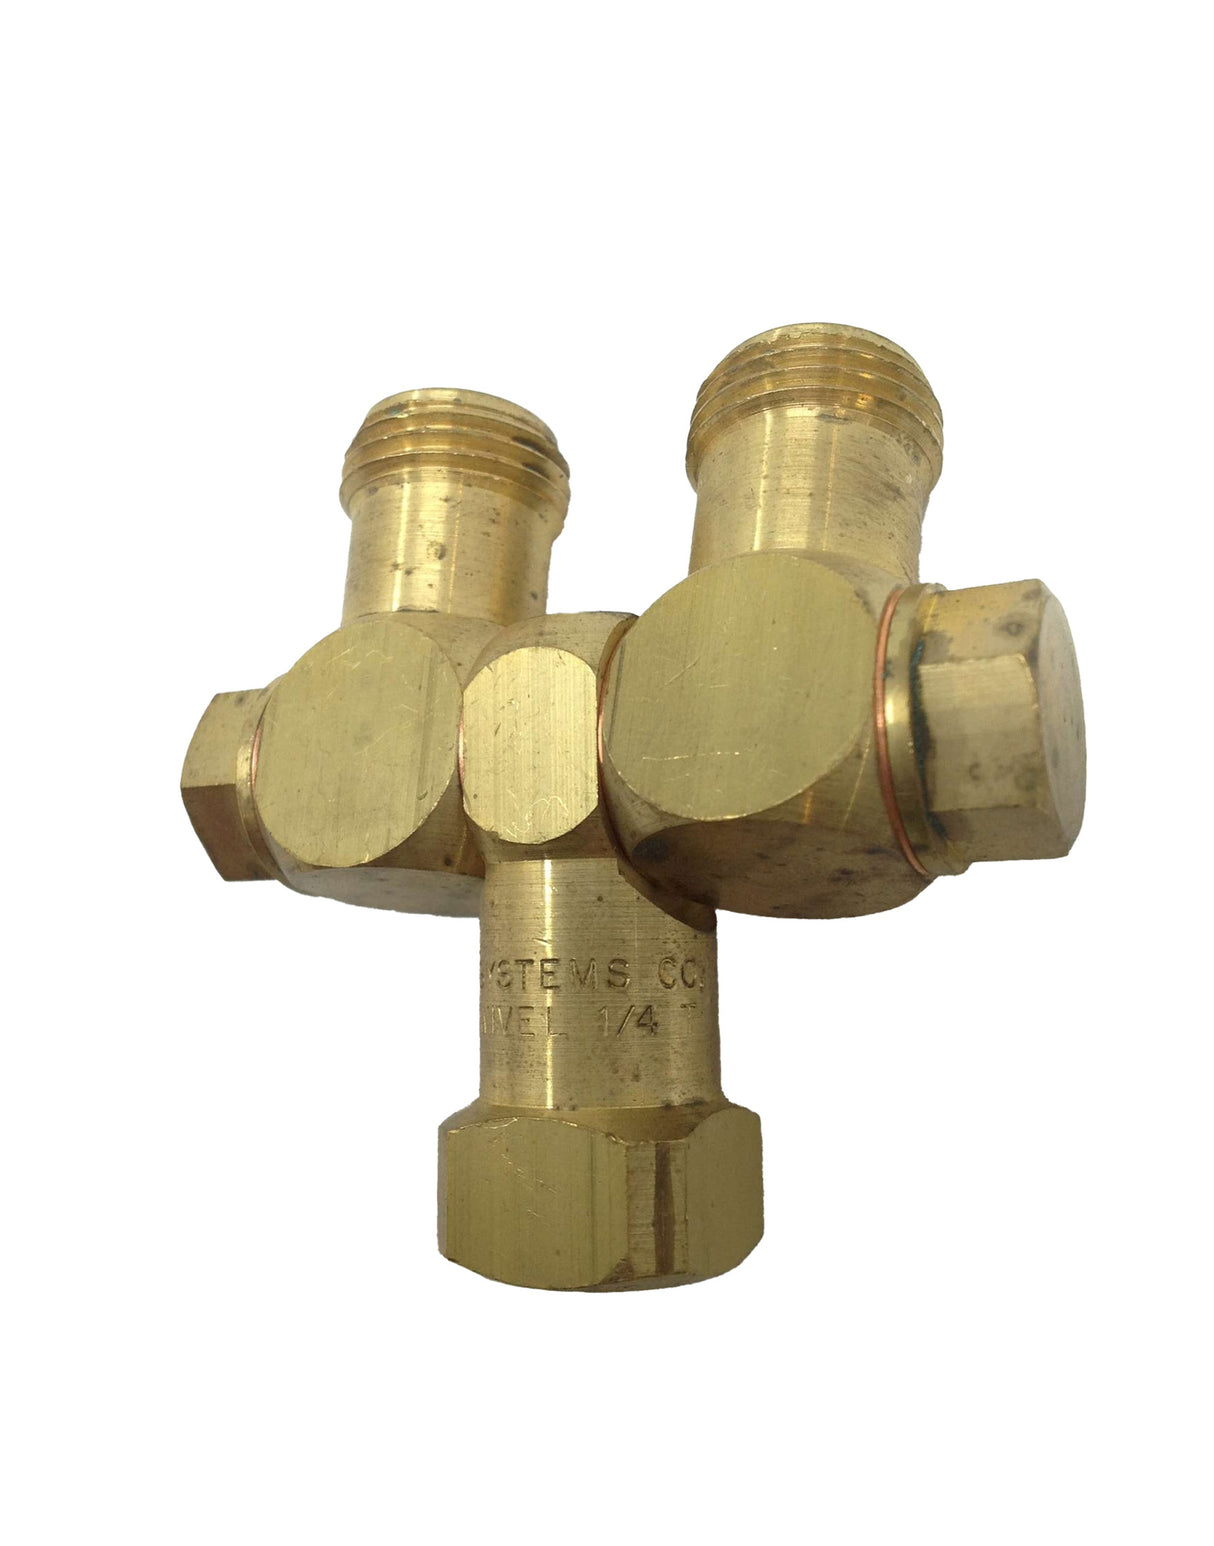 SPRAYING SYSTEMS CO  [SS CO] ­-­ 4202-2-1/4T ­-­ DOUBLE SWIVEL NOZZLE BODY